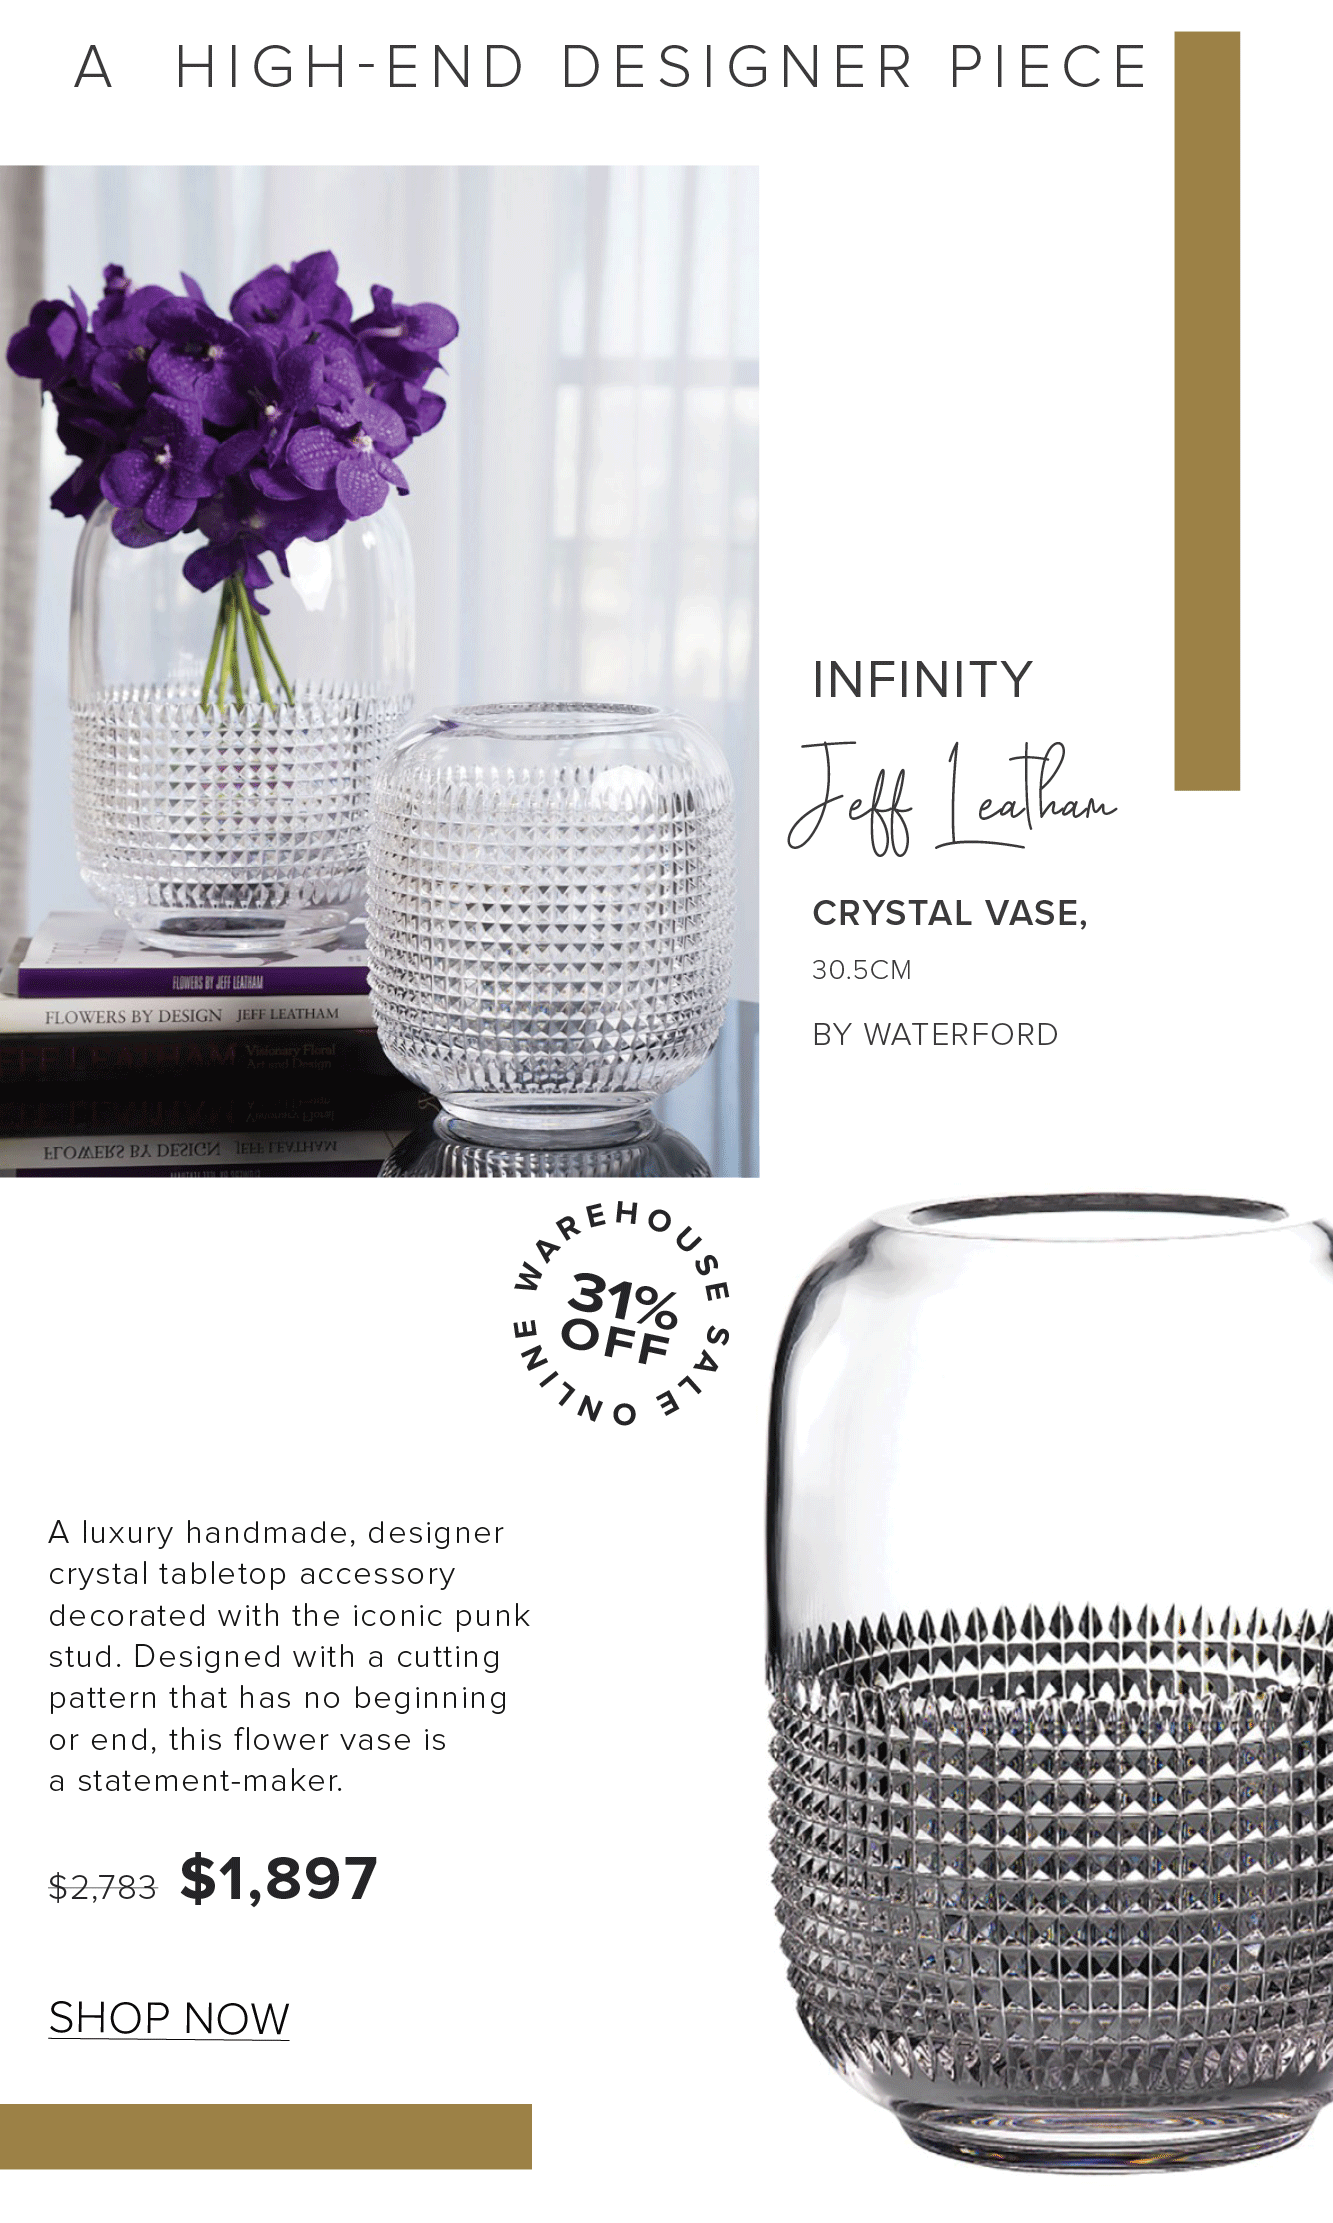 A HIGH-END DESIGNER PIECE INFINITY It v e vy vy Yl '"""" CRYSTAL VASE, ' 30.5CM ww Y mEwww v". BY WATERFORD A luxury handmade, designer crystal tabletop accessory decorated with the iconic punk stud. Designed with a cutting pattern that has no beginning or end, this flower vase is 3 b a statement-maker. AR LN *AAAAAAAAAAA,M"A : 52783 $1,897 o L AAAAAALAM -l SHOP NOW 